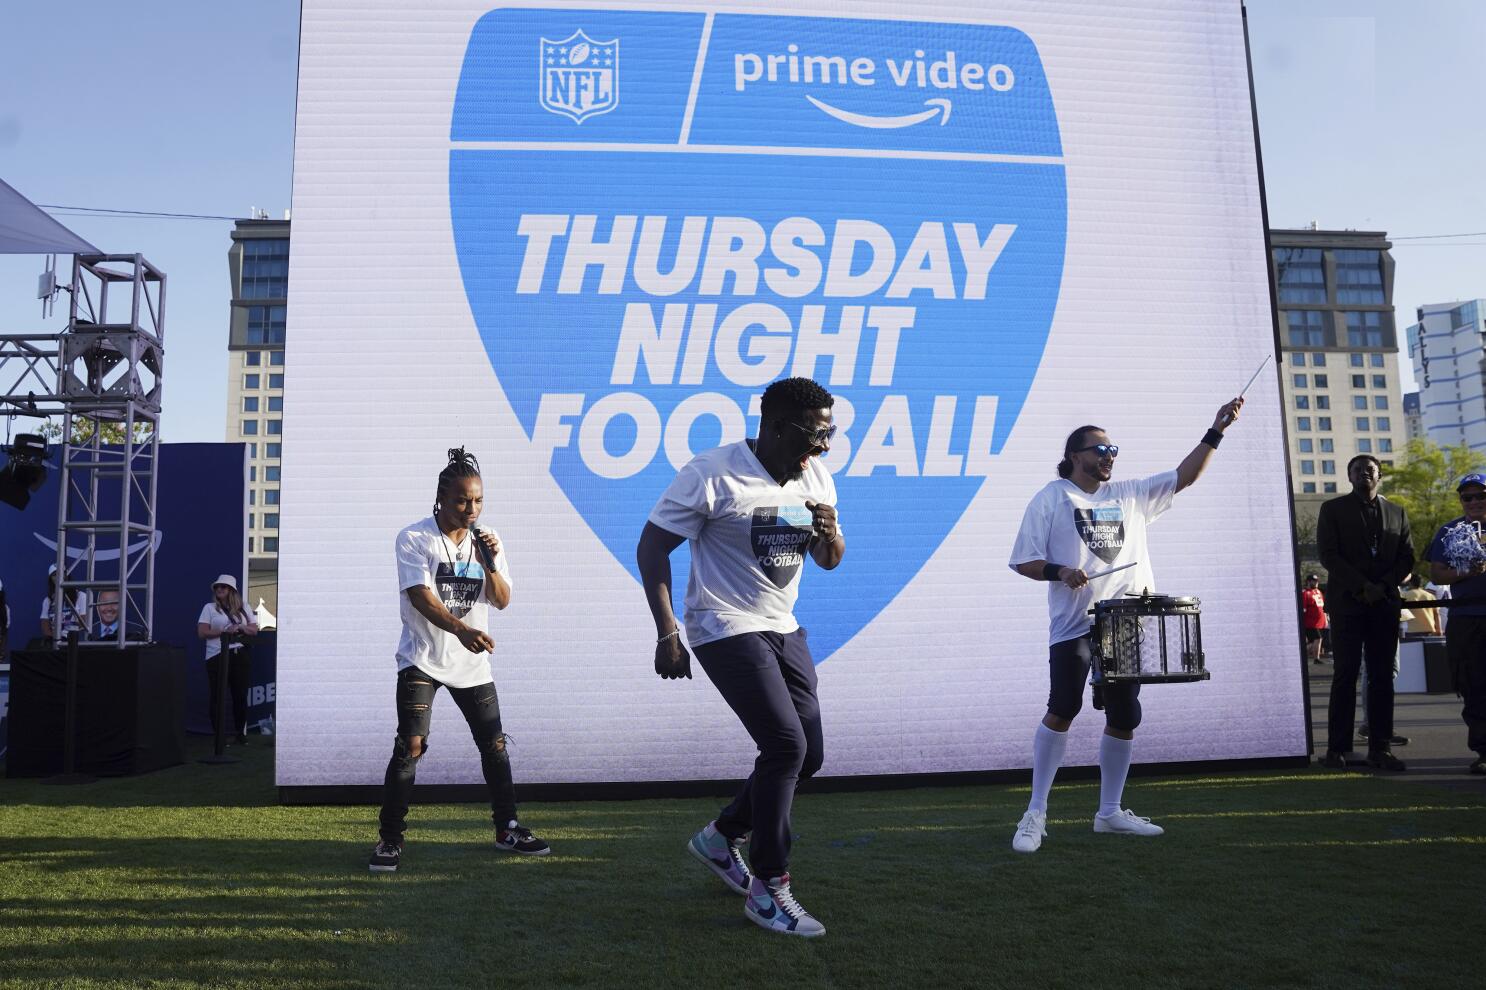 Thursday Night Football': Where to find Prime Video games - The San Diego  Union-Tribune